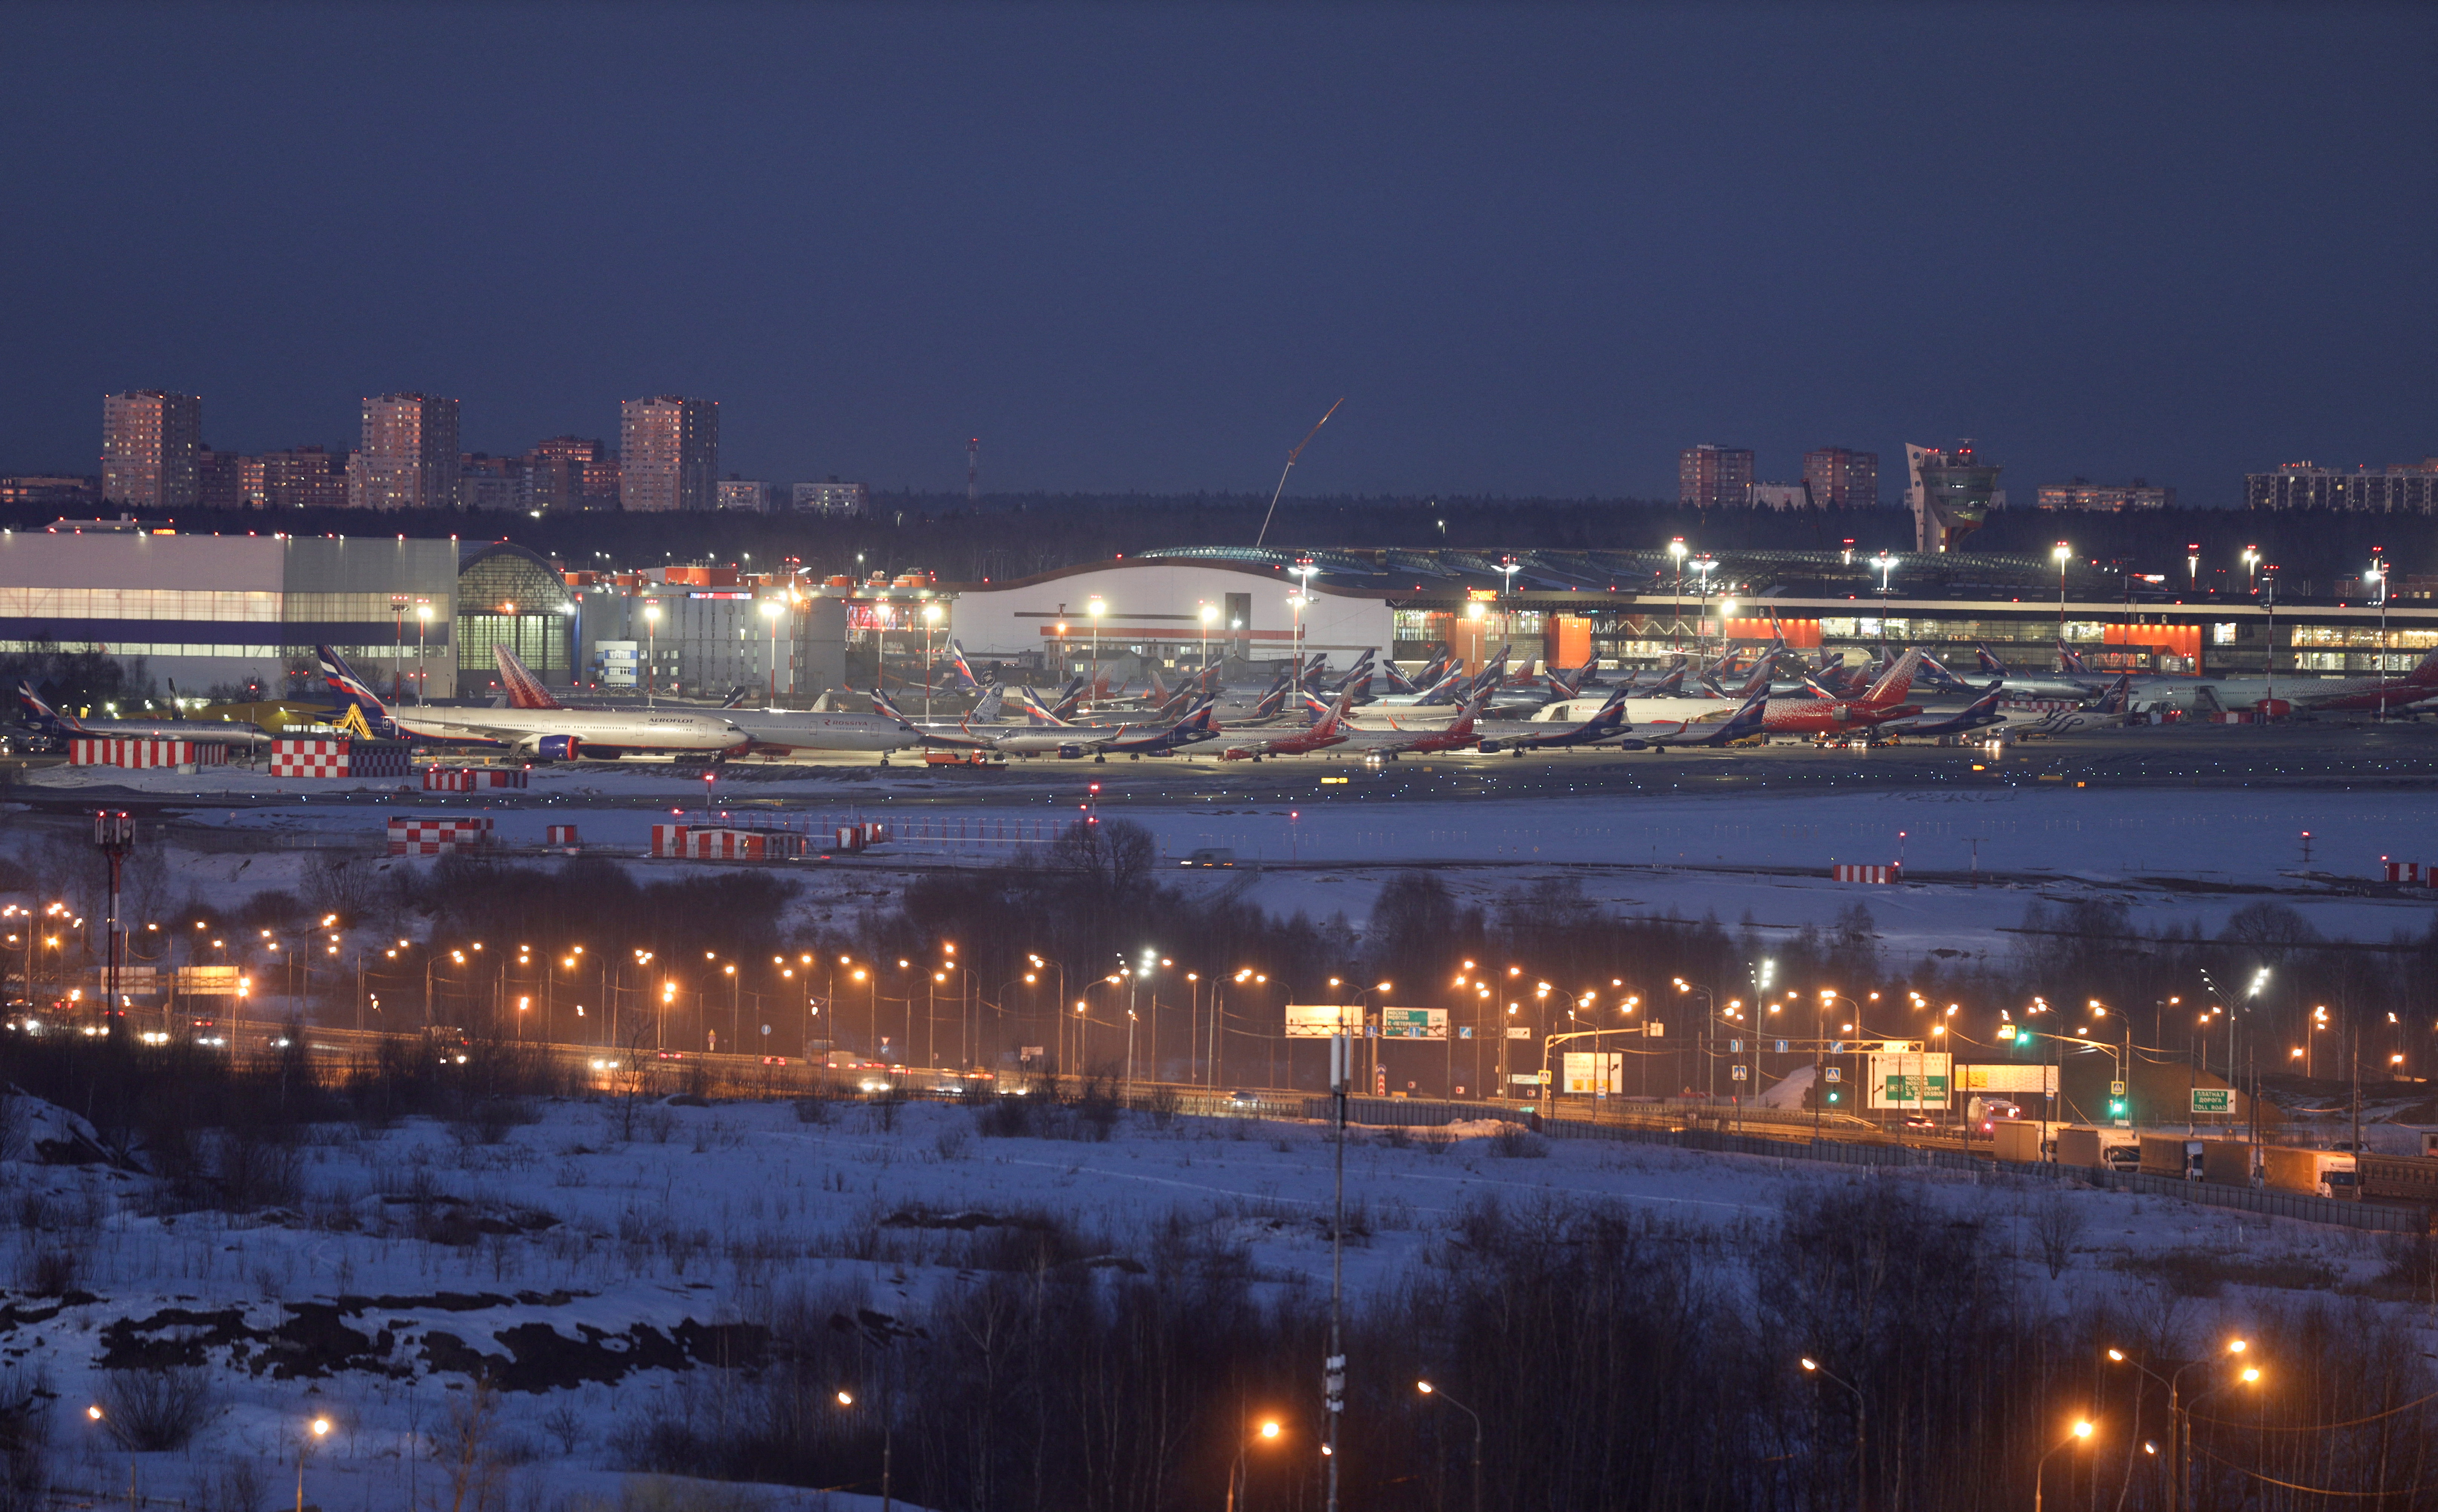 Planes are parked at Sheremetyevo International Airport in Moscow